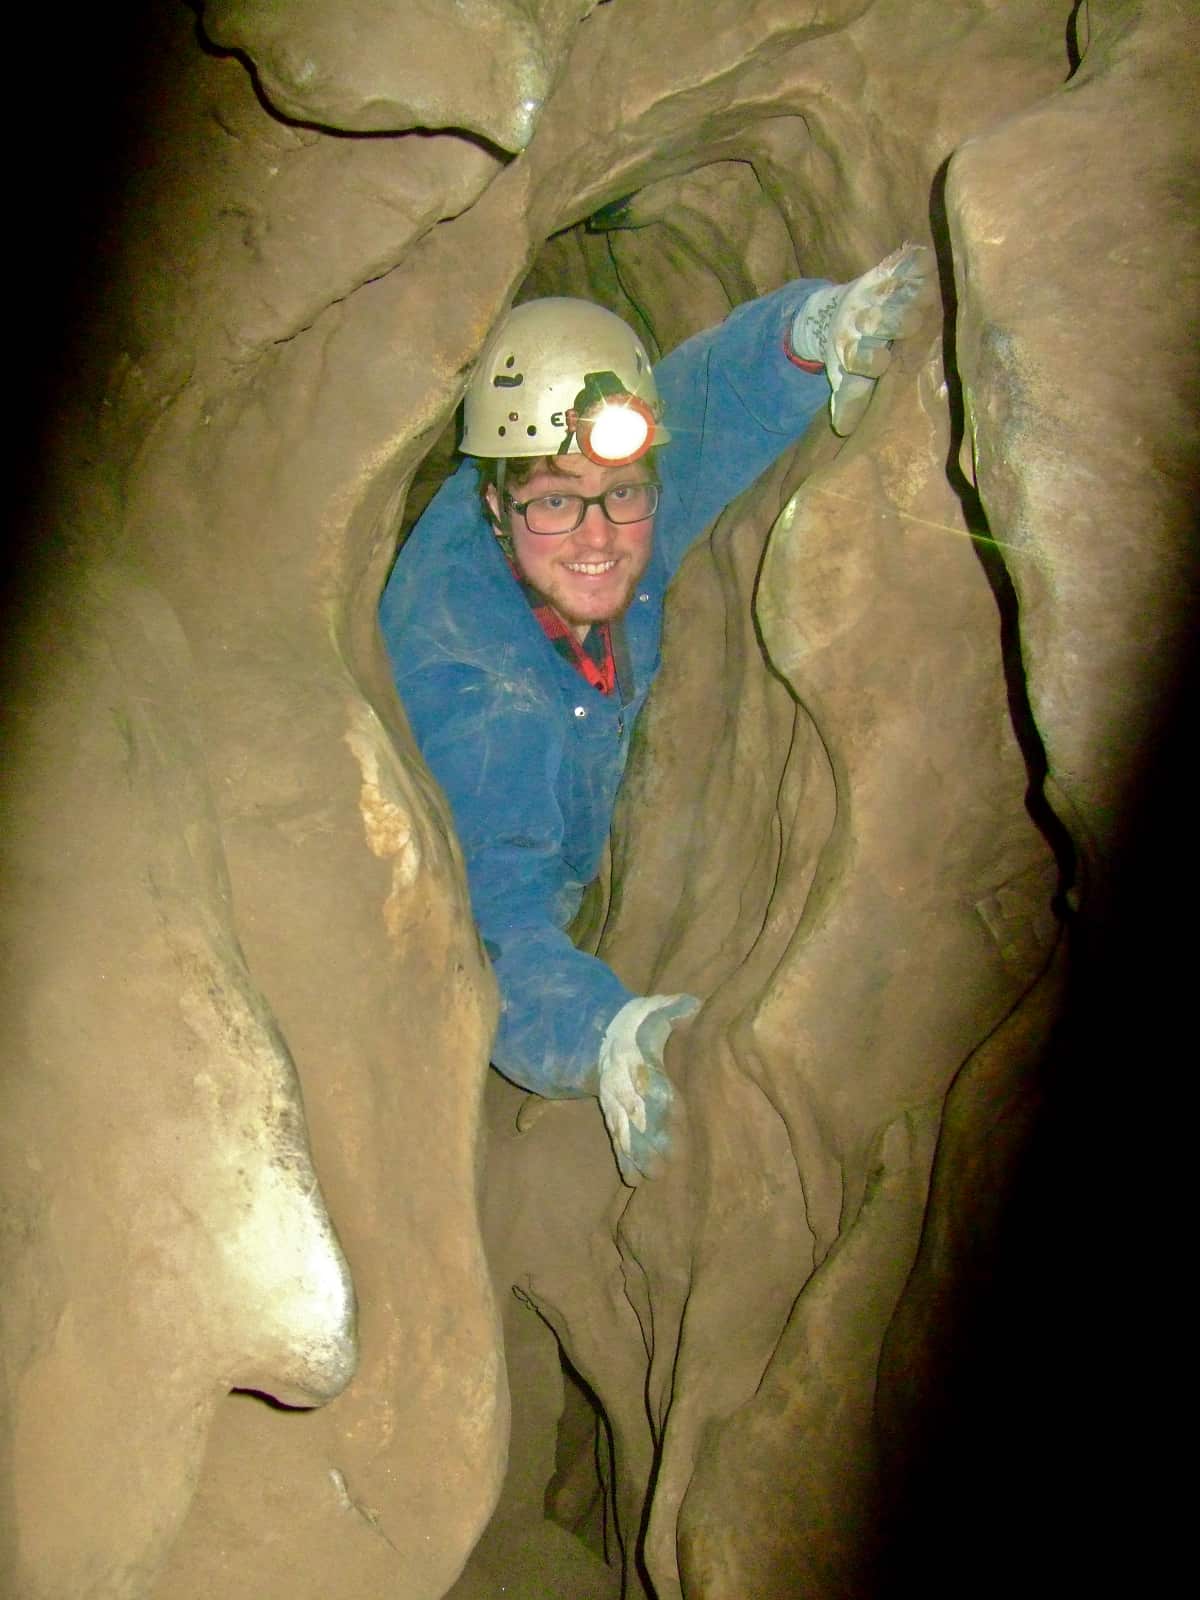 Man in blue coveralls squeezing through narrow cave